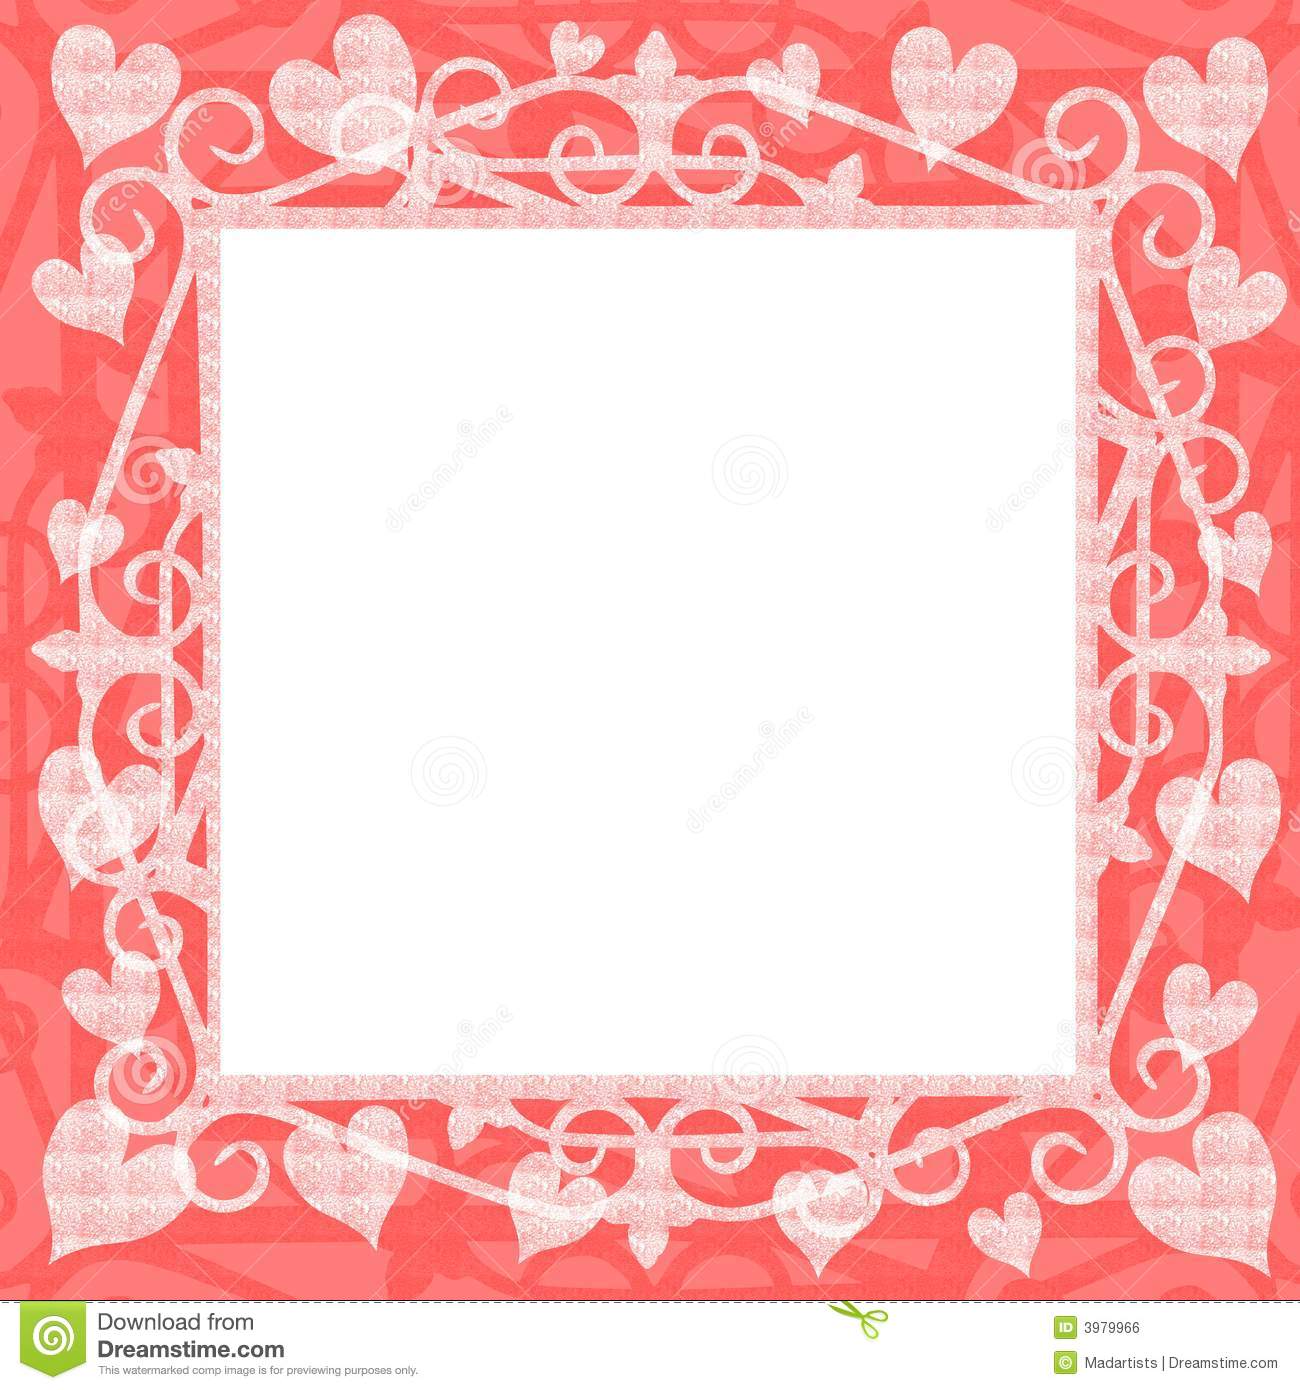 Background Illustration Featuring A Square Frame Of Light Pink Hearts